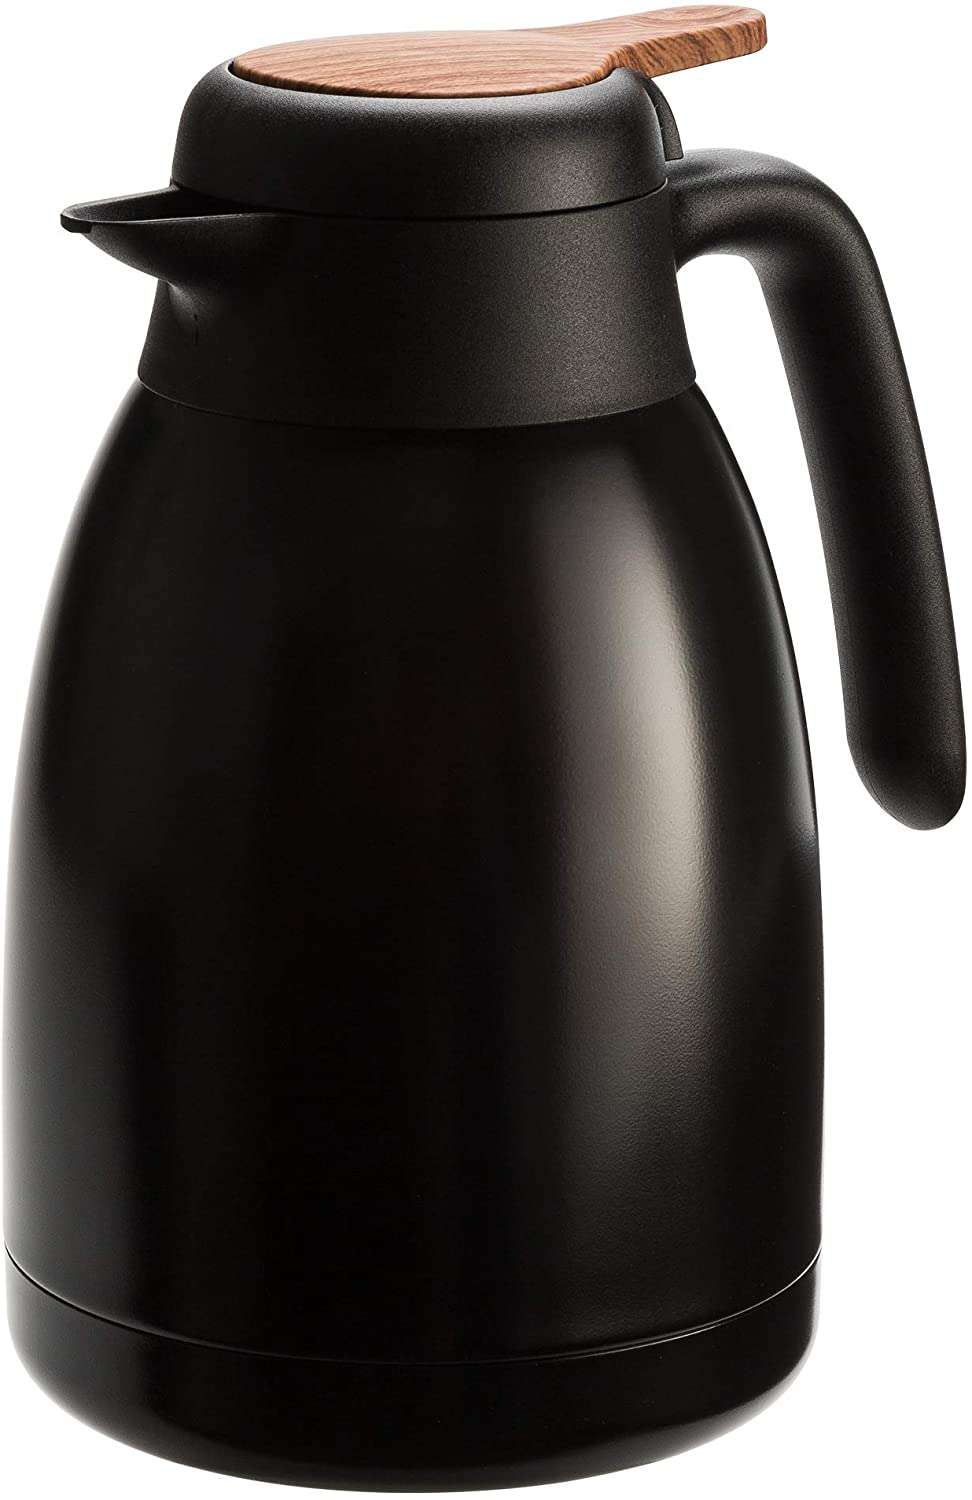 Hastings Collective Thermal Coffee Carafe 50 Oz - Large Stainless Steel  Insulated Carafe - 1.5 Liter Double Walled